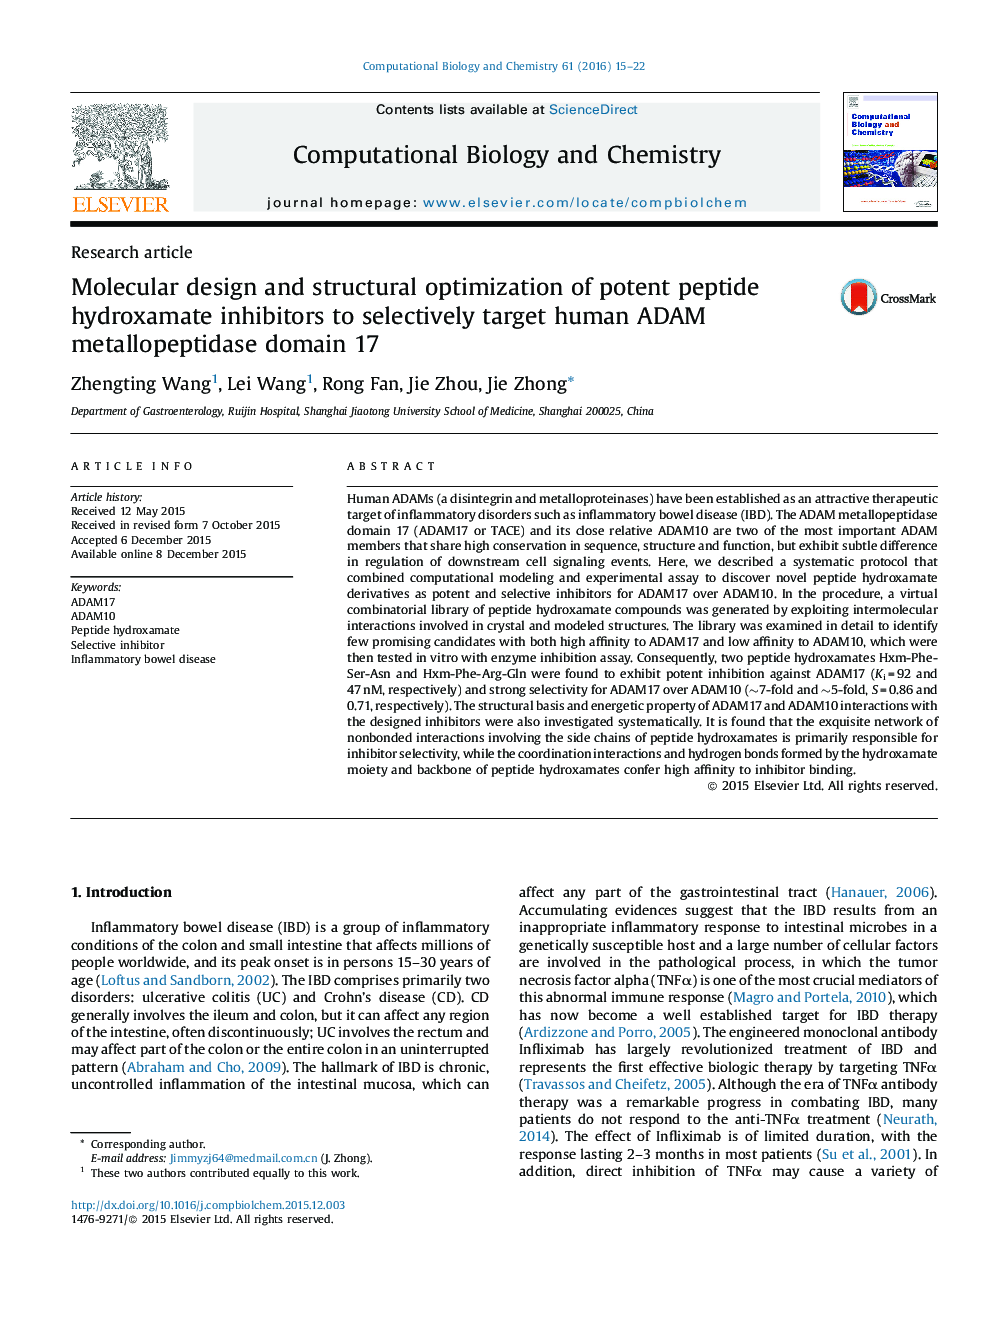 Molecular design and structural optimization of potent peptide hydroxamate inhibitors to selectively target human ADAM metallopeptidase domain 17